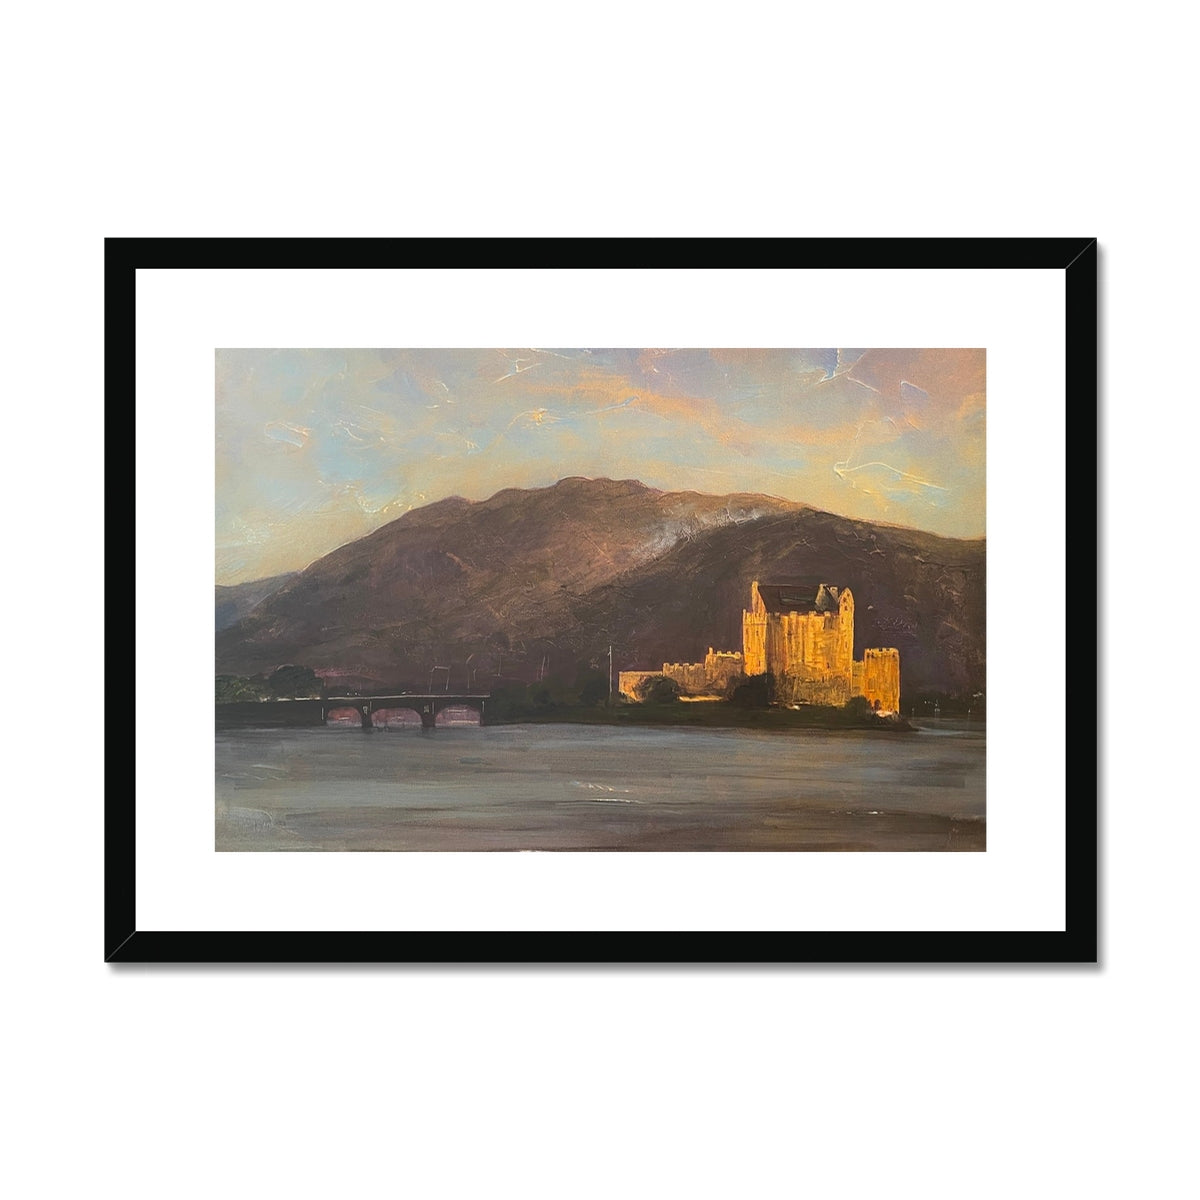 Eilean Donan Castle Painting | Framed & Mounted Prints From Scotland-Framed & Mounted Prints-Historic & Iconic Scotland Art Gallery-A2 Landscape-Black Frame-Paintings, Prints, Homeware, Art Gifts From Scotland By Scottish Artist Kevin Hunter